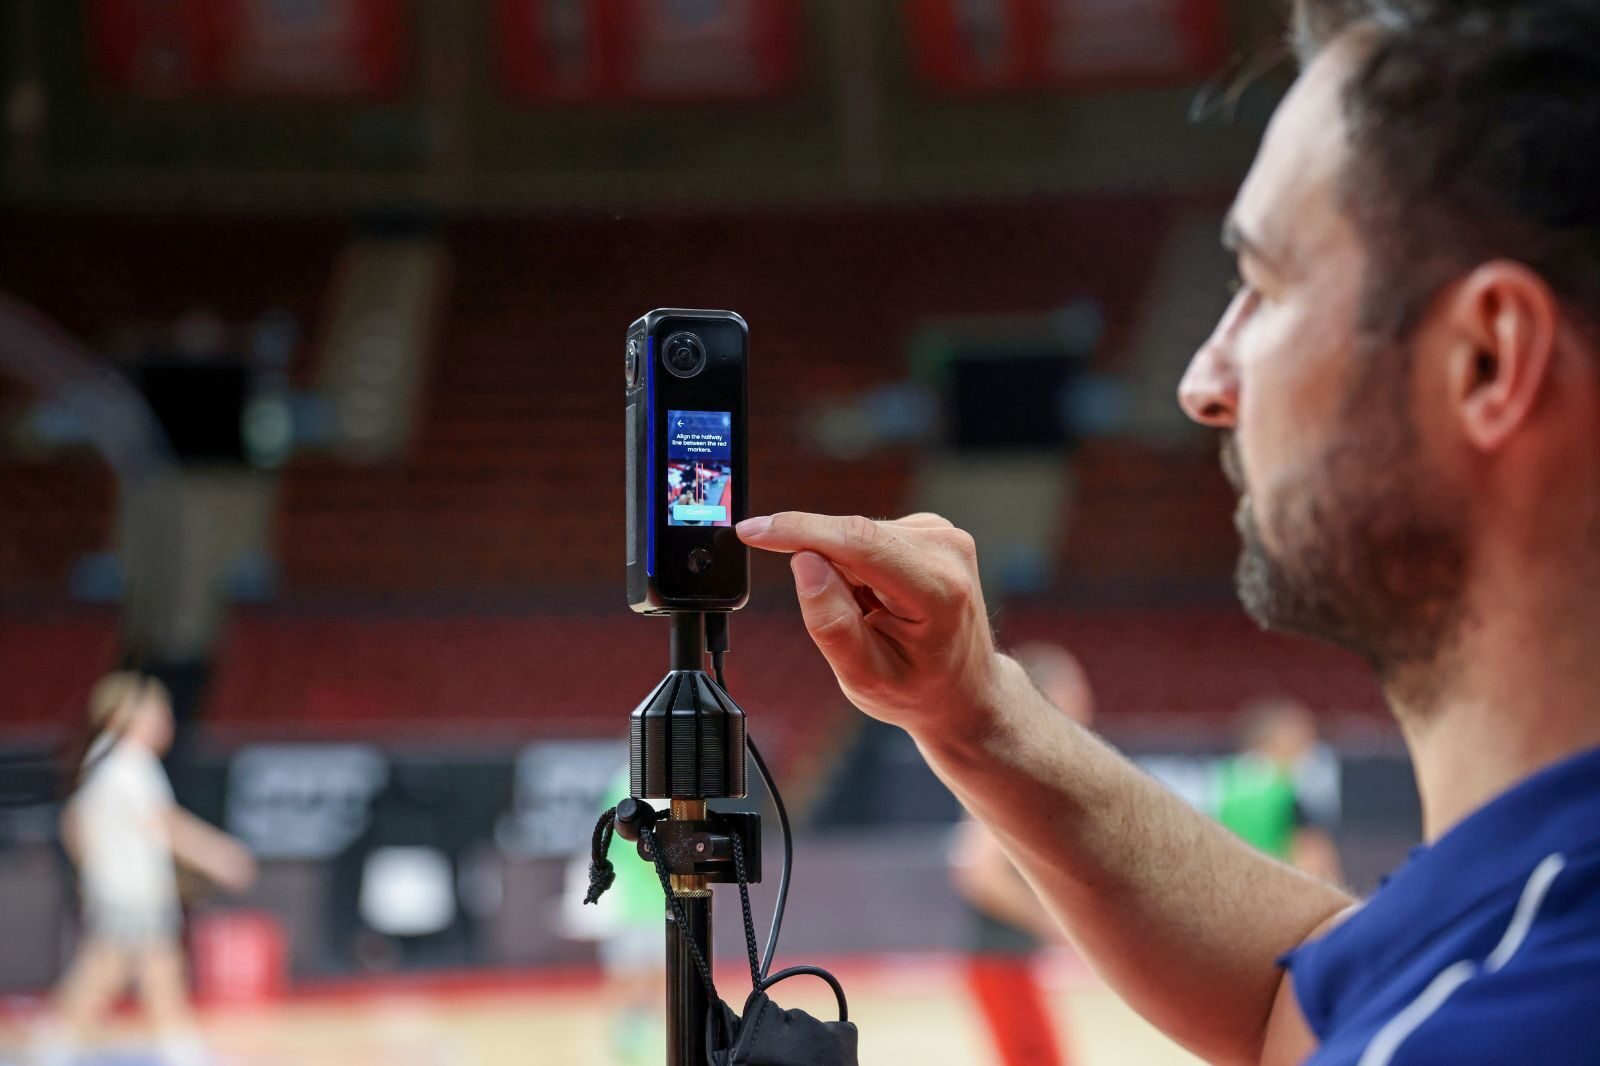 a coach sets up a camera for video that he will upload to a sports analysis software and get back data on his players.